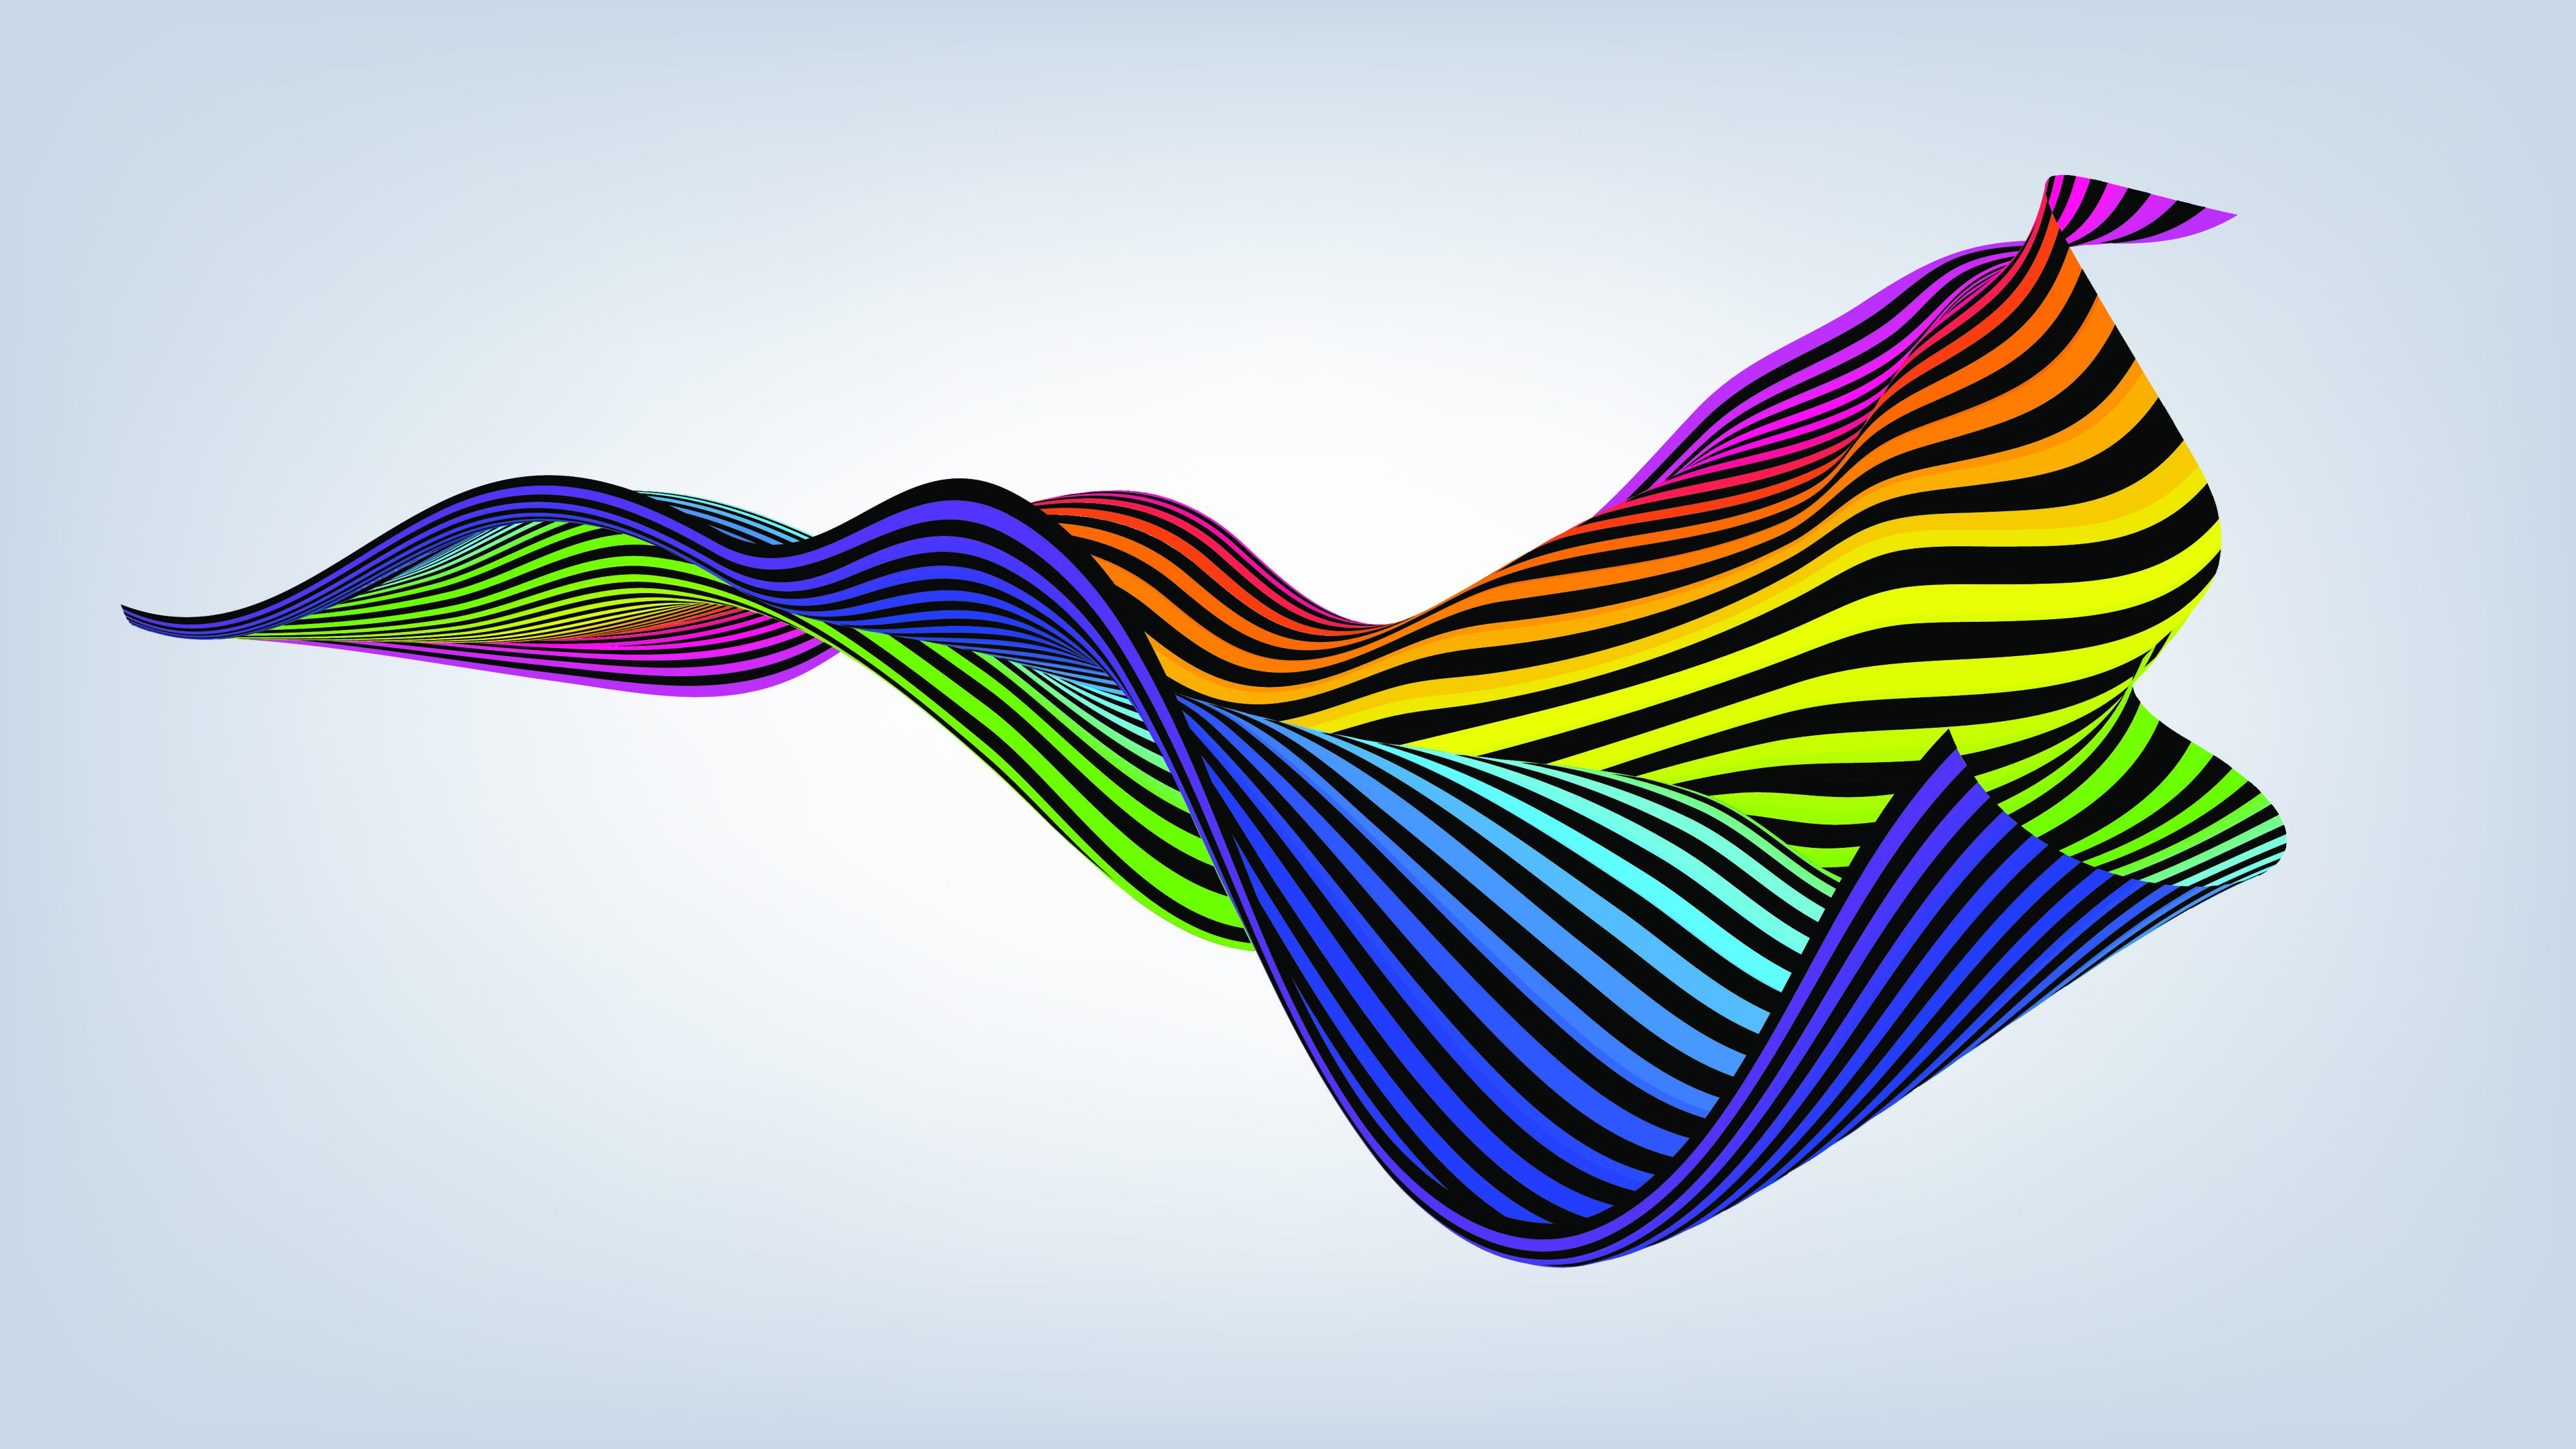 A vibrant digital artwork of a flowing wave pattern with rainbow colors on a grey background.